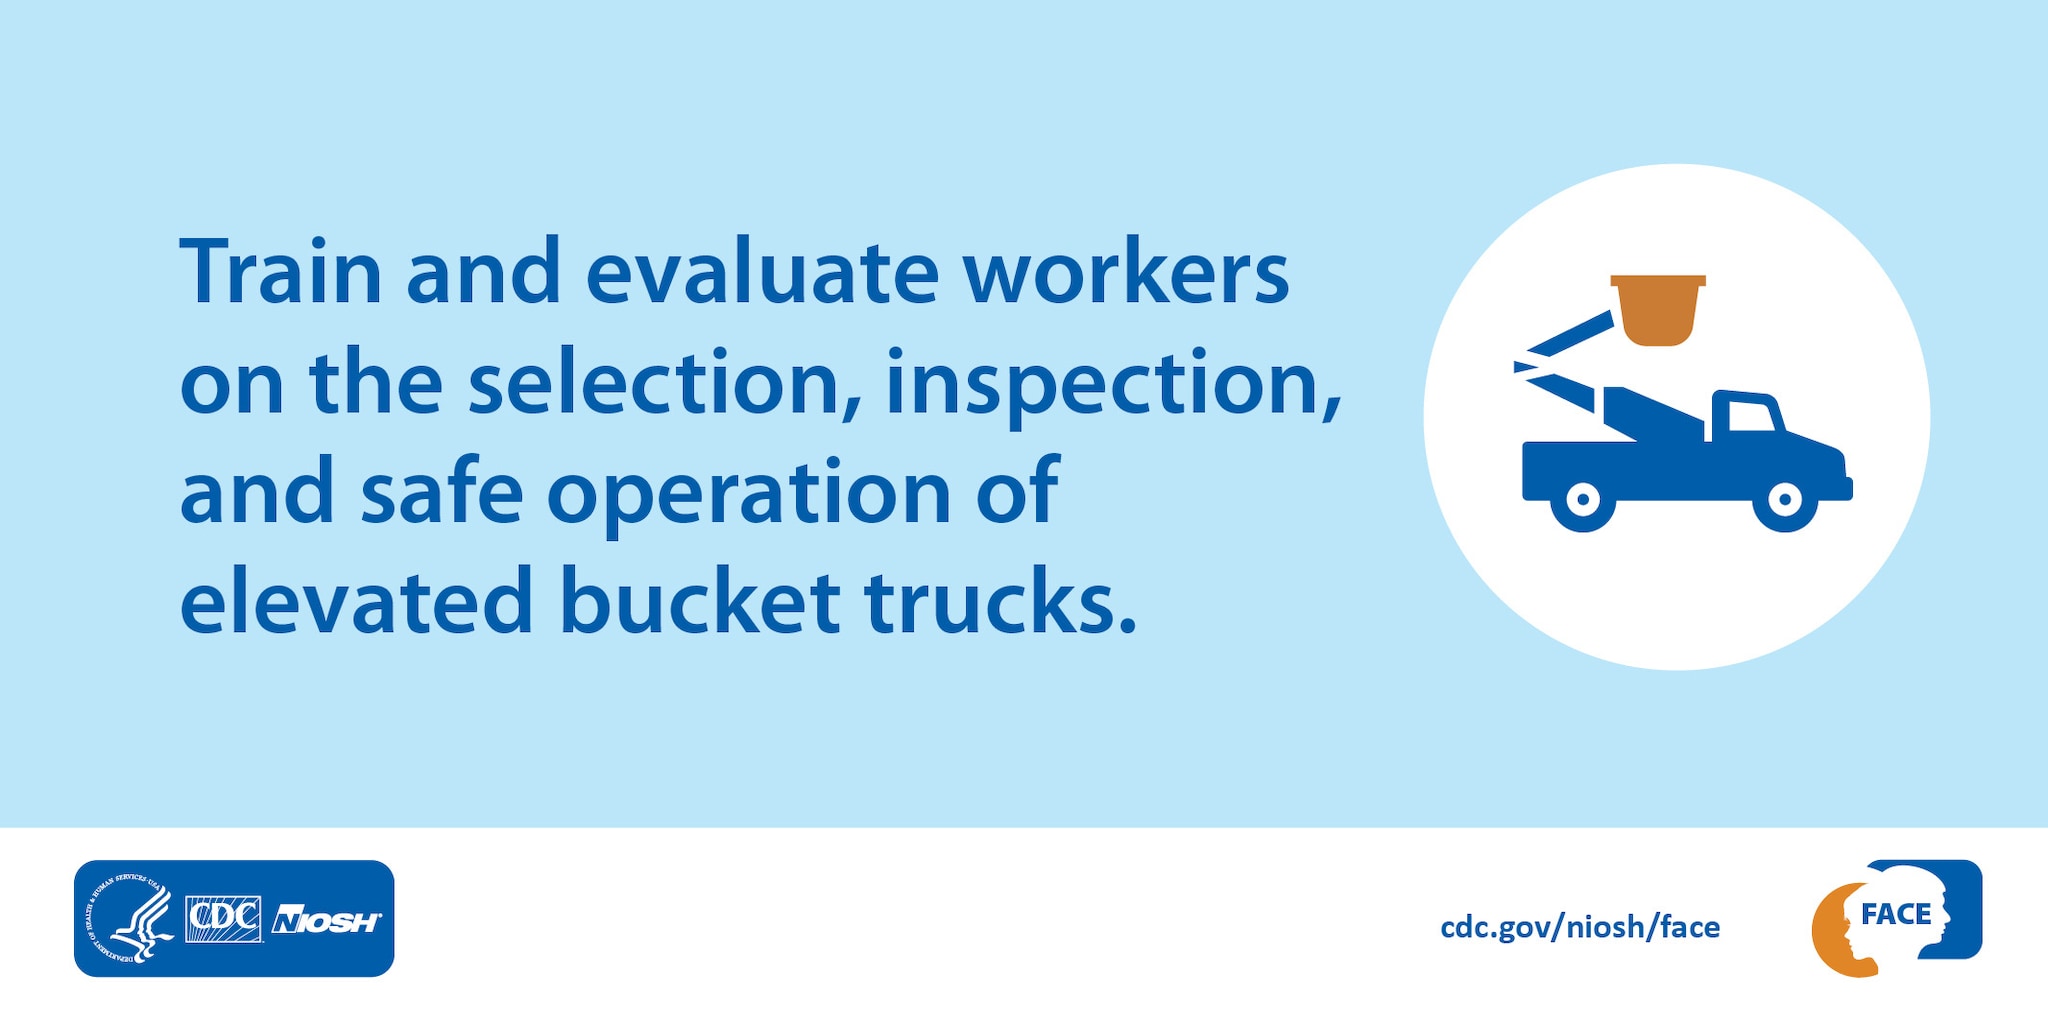 Train and evaluate workers on the selection, inspection, and safe operation of elevated bucket trucks.